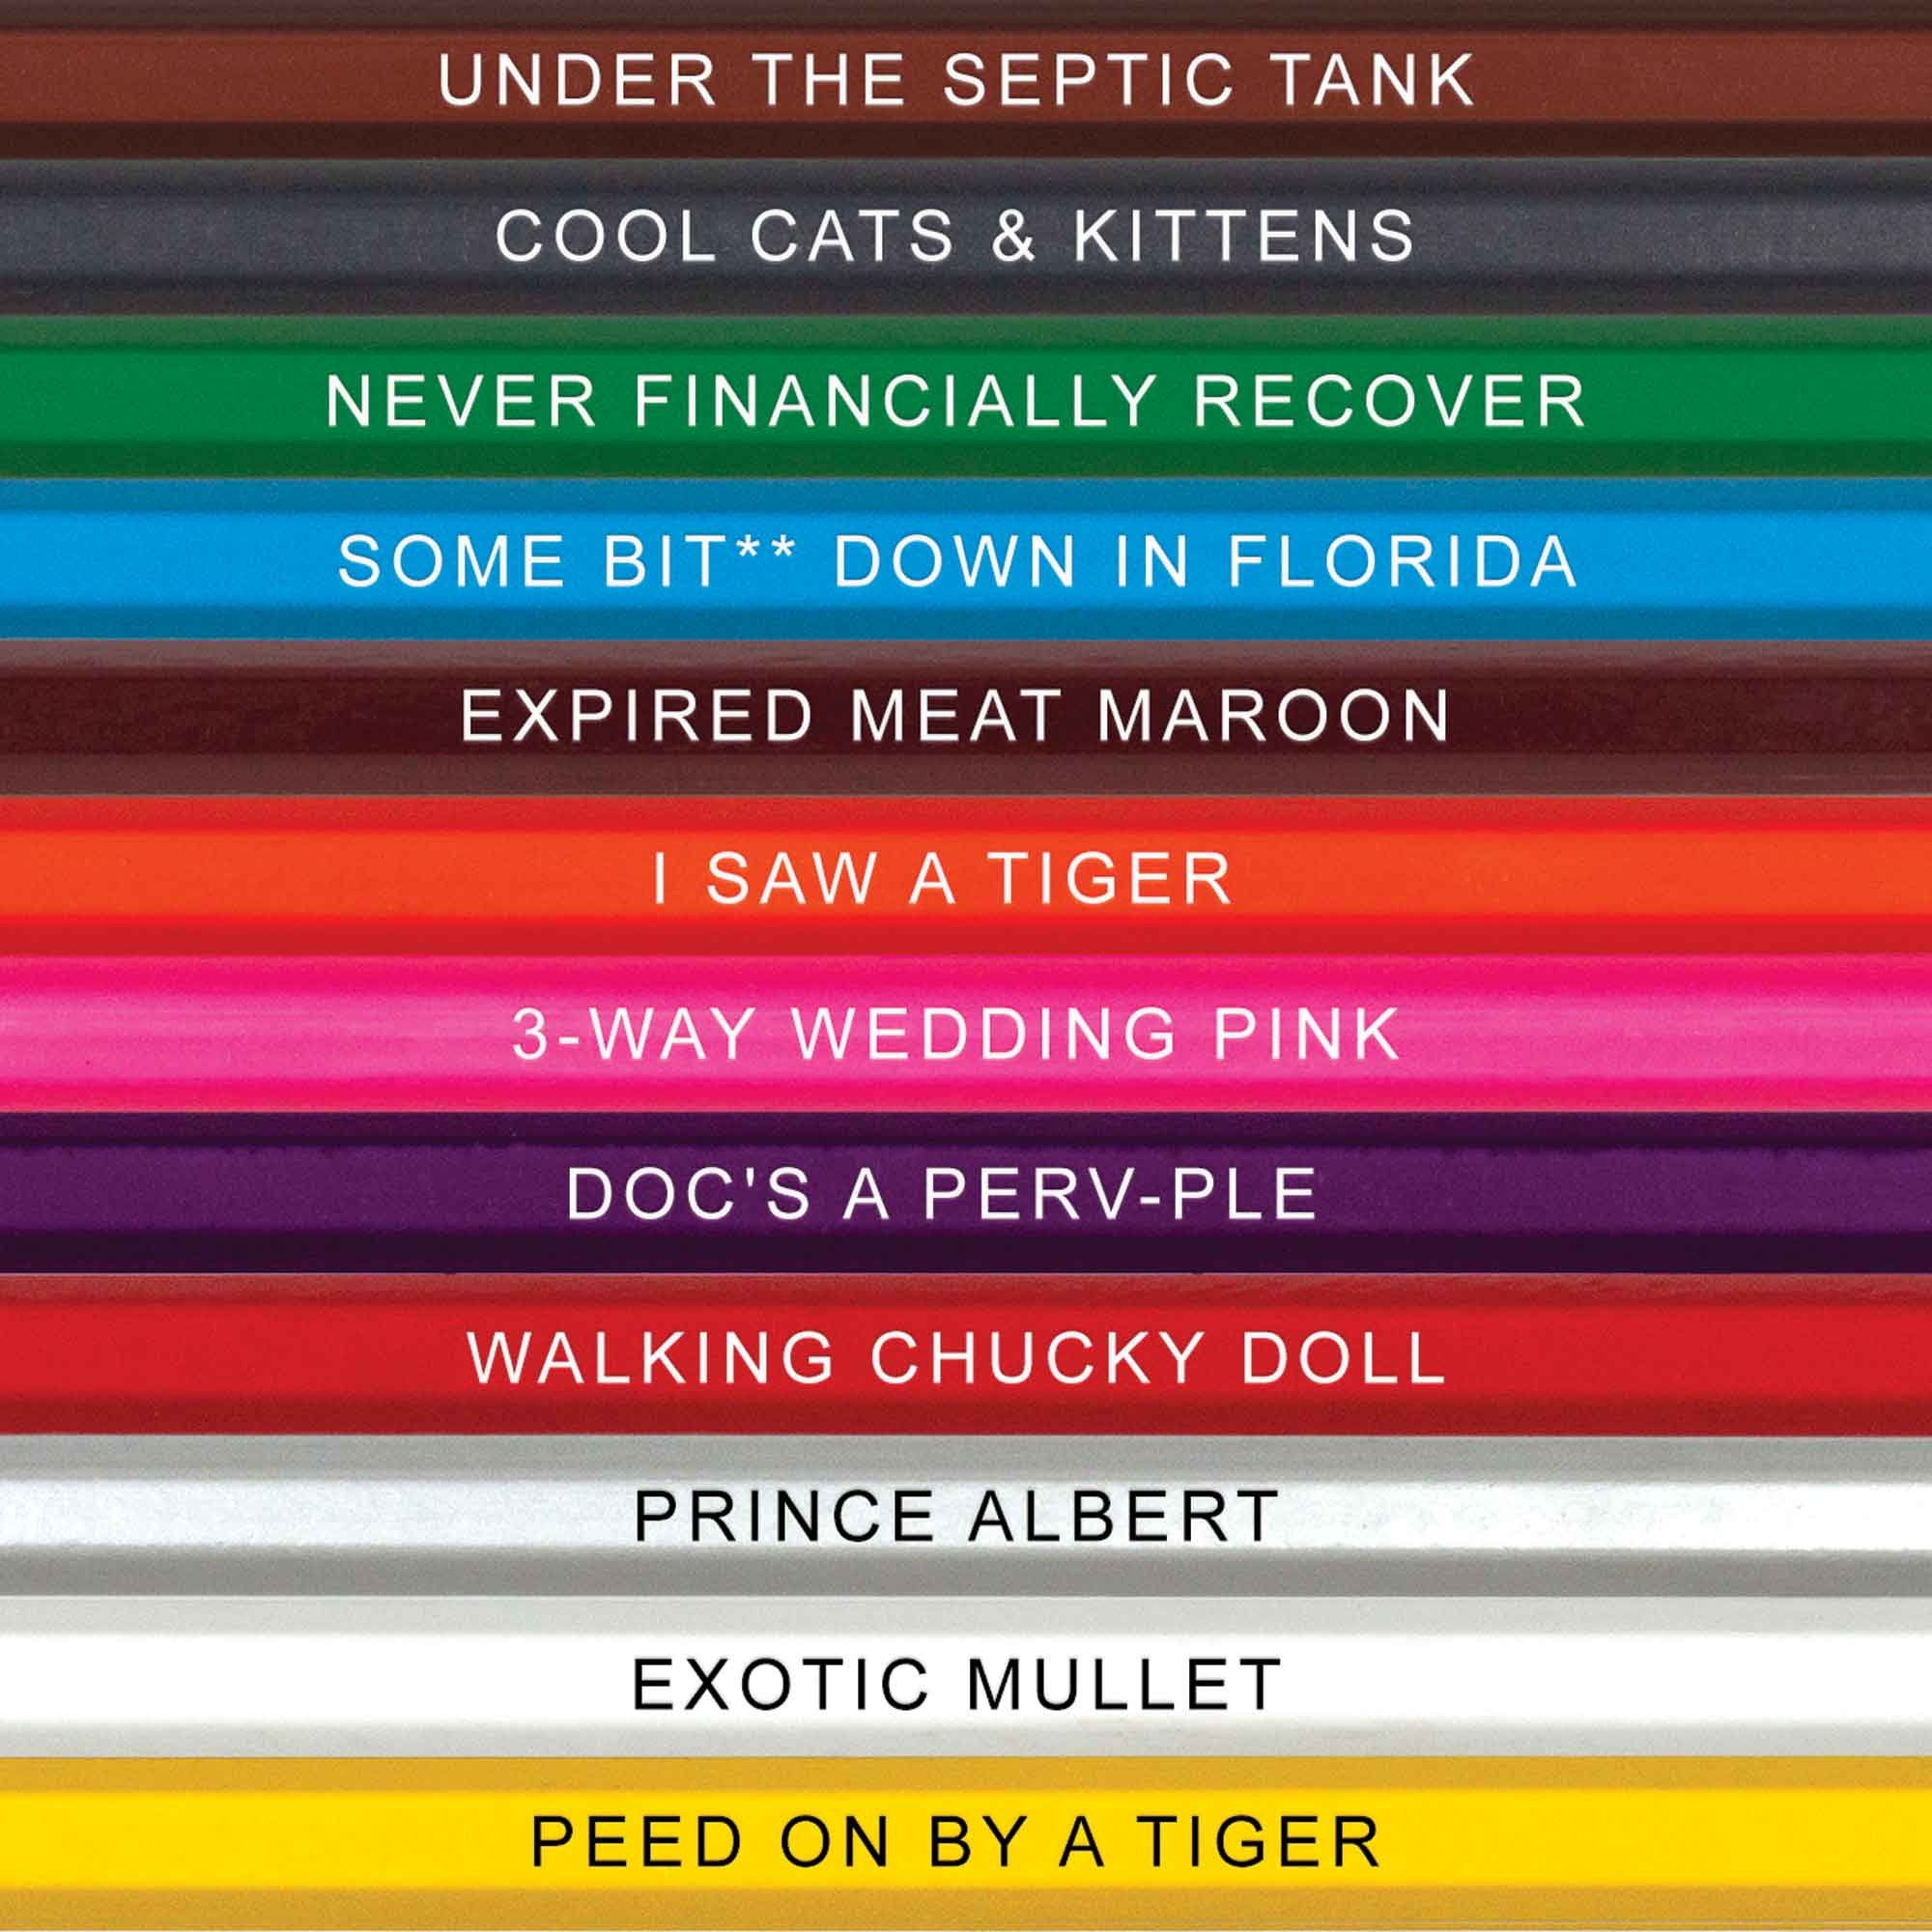 Exotic Colors Colored Pencil Set for Fans of Tiger King | Set of 12 Tiger King-Inspired Parody Pencils | Each Color Pencil Is Foil-Stamped with Clever